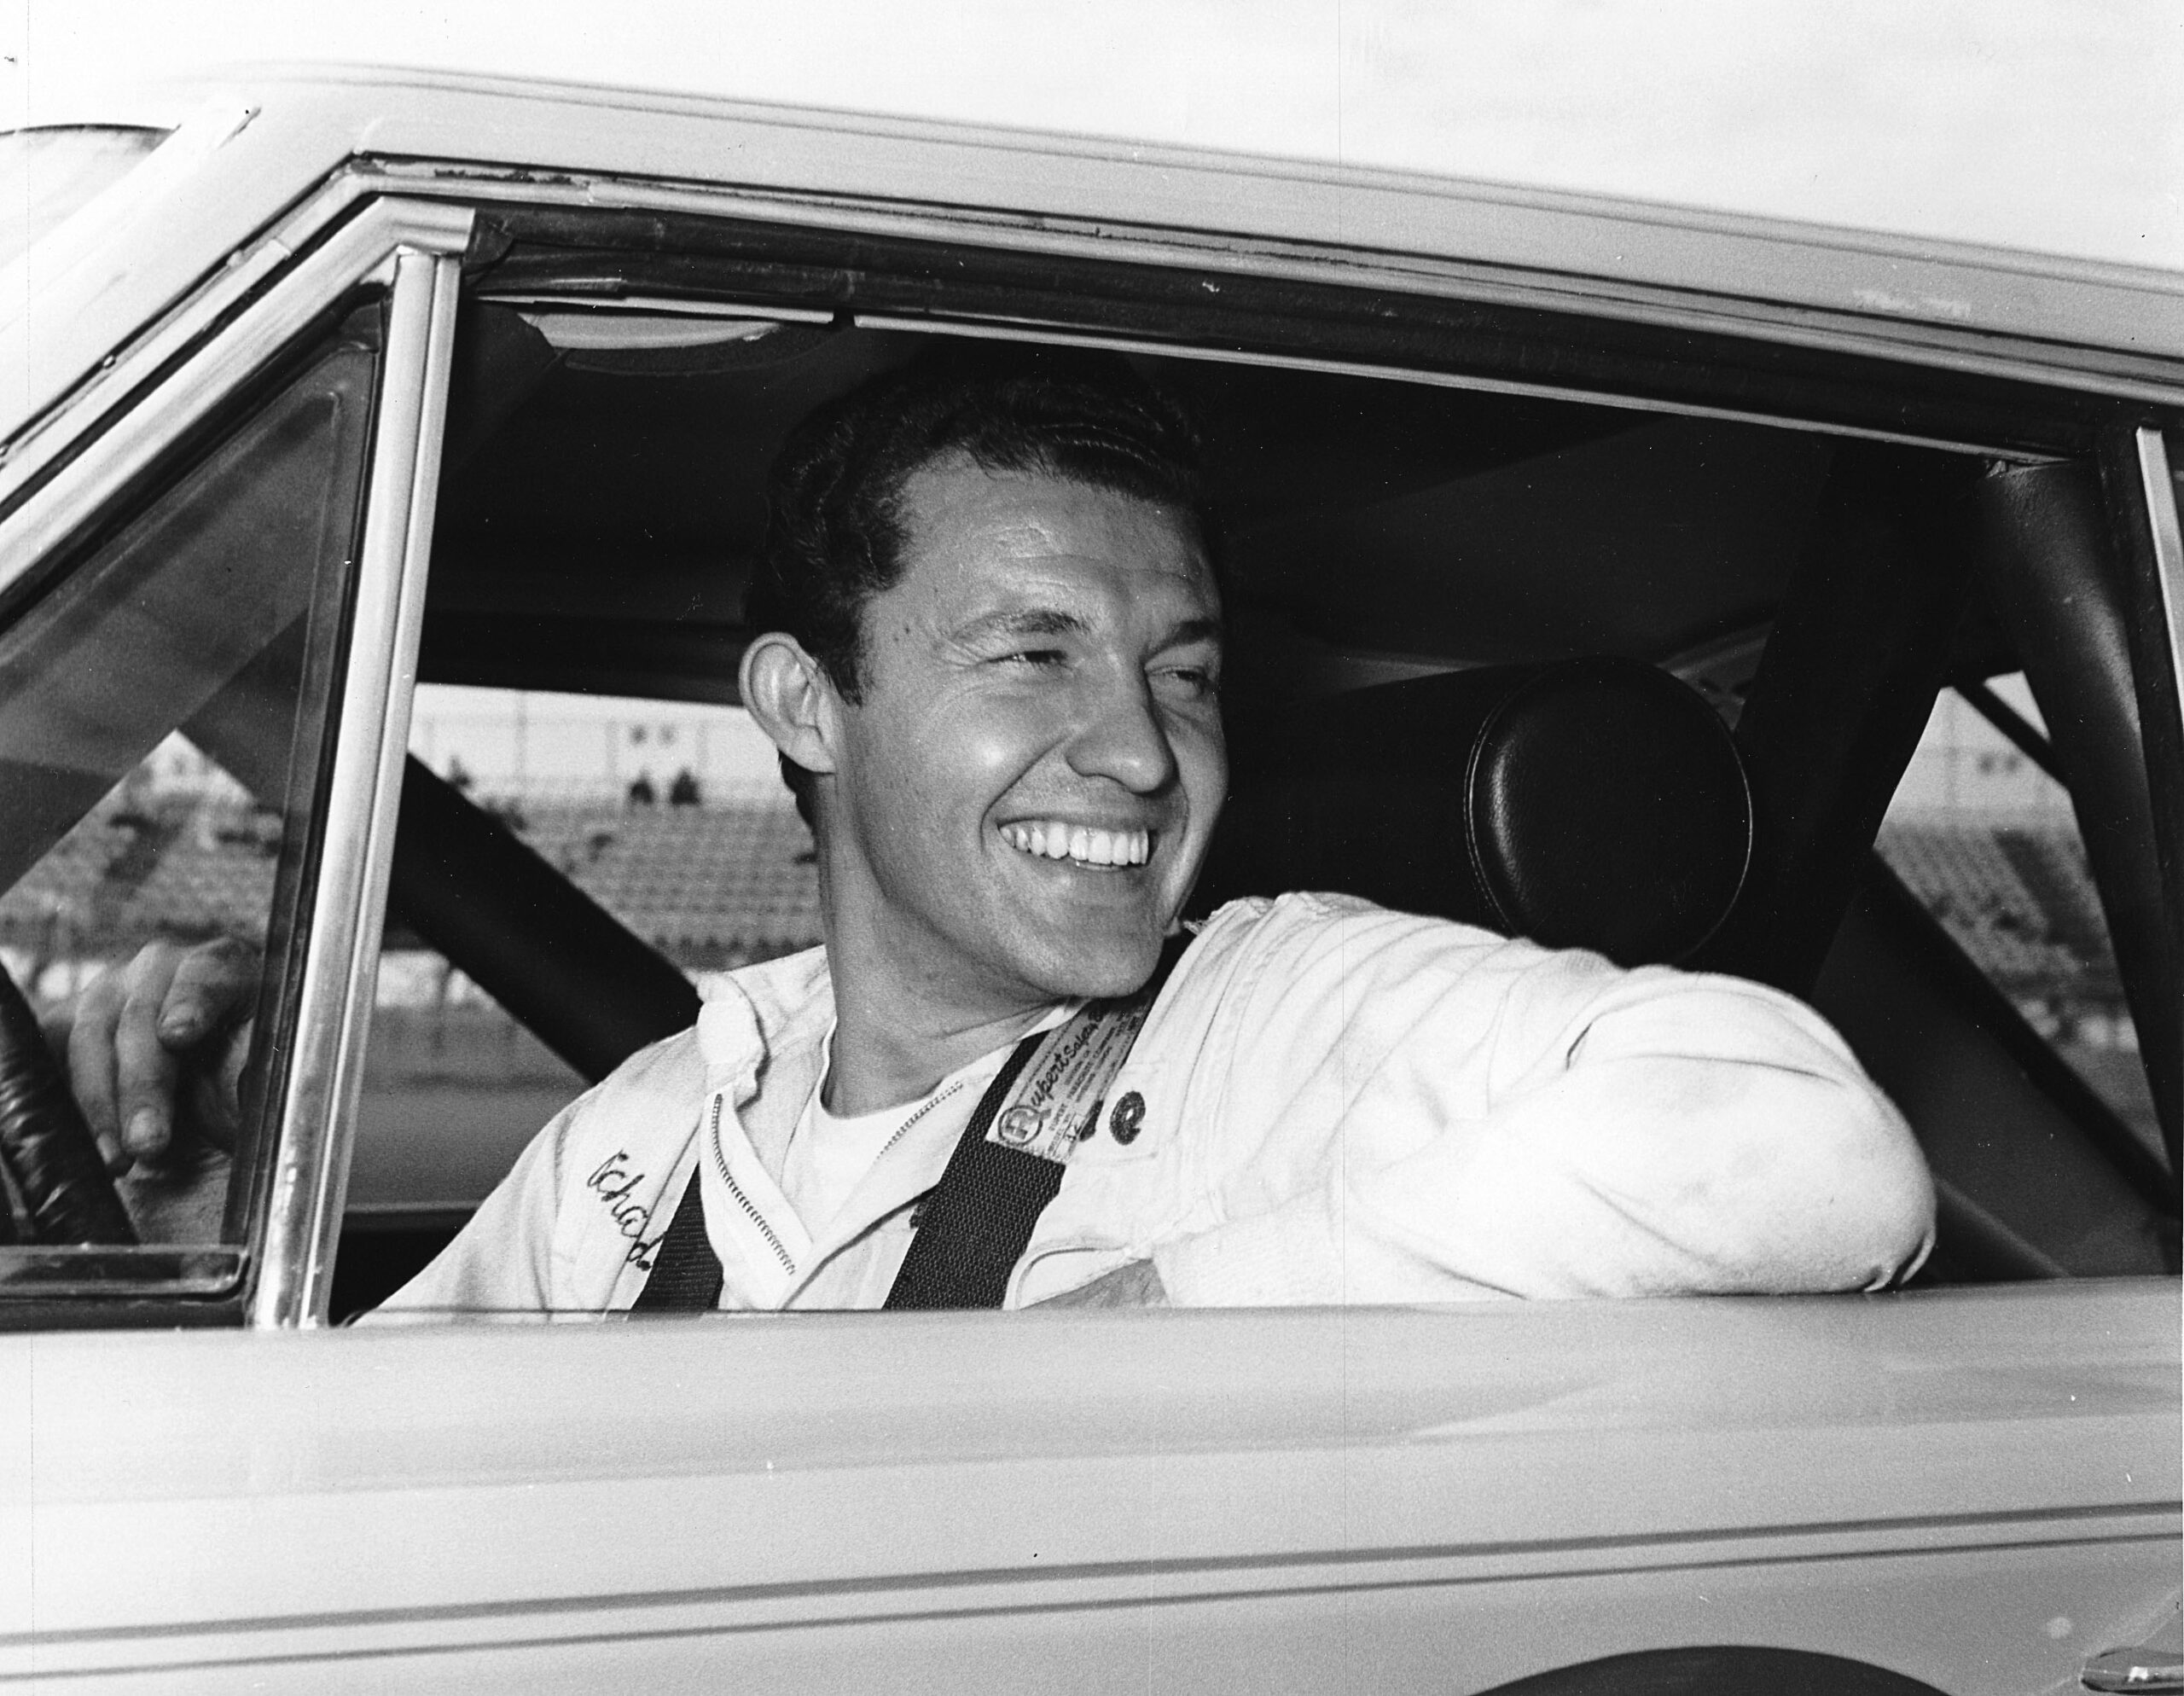 Mid-1960s: Richard Petty sits in one of his Petty Enterprises rides he used at Daytona International Speedway. During his career, Petty made 74 starts in Cup races at Daytona, scoring 10 victories; seven in the Daytona 500 and three in the Firecracker 4